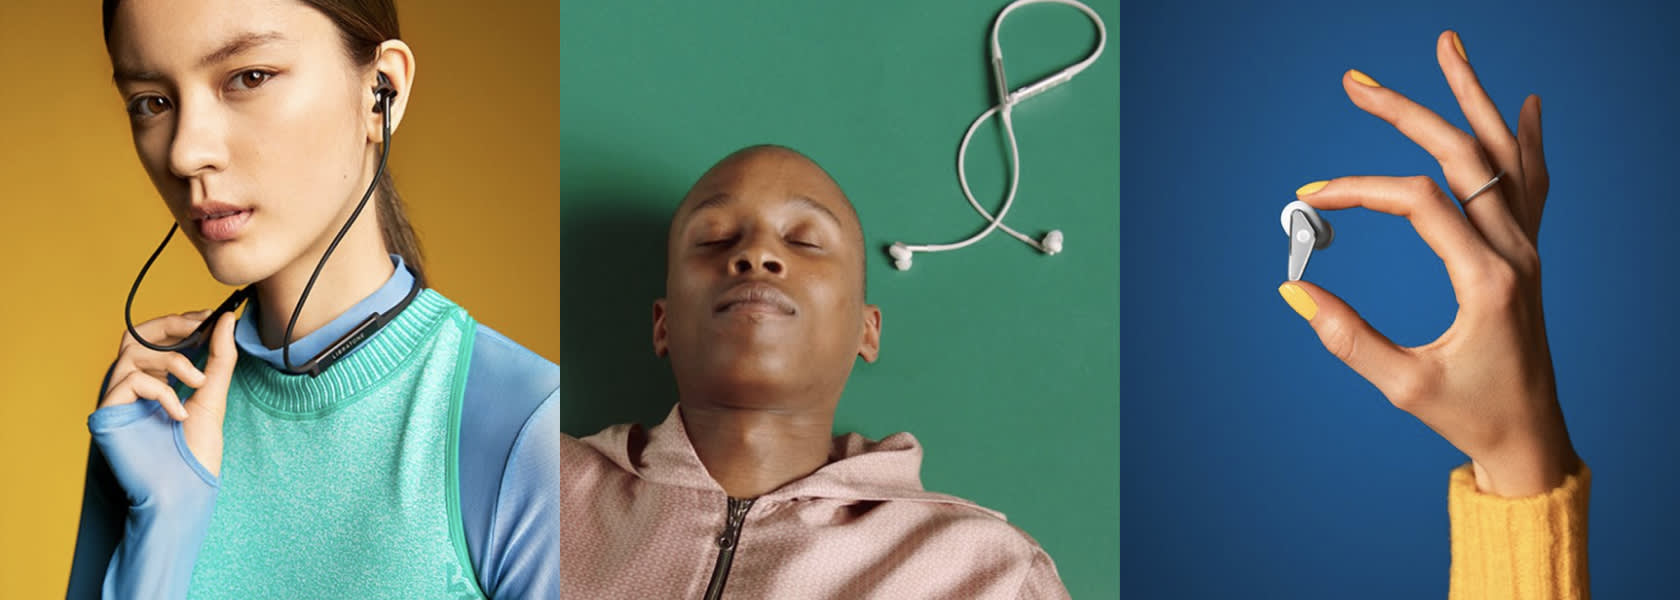 Three pictures of the Libratone earphones: a woman with earphones, a man lying next to the earphones and an earphone held in the woman's hand